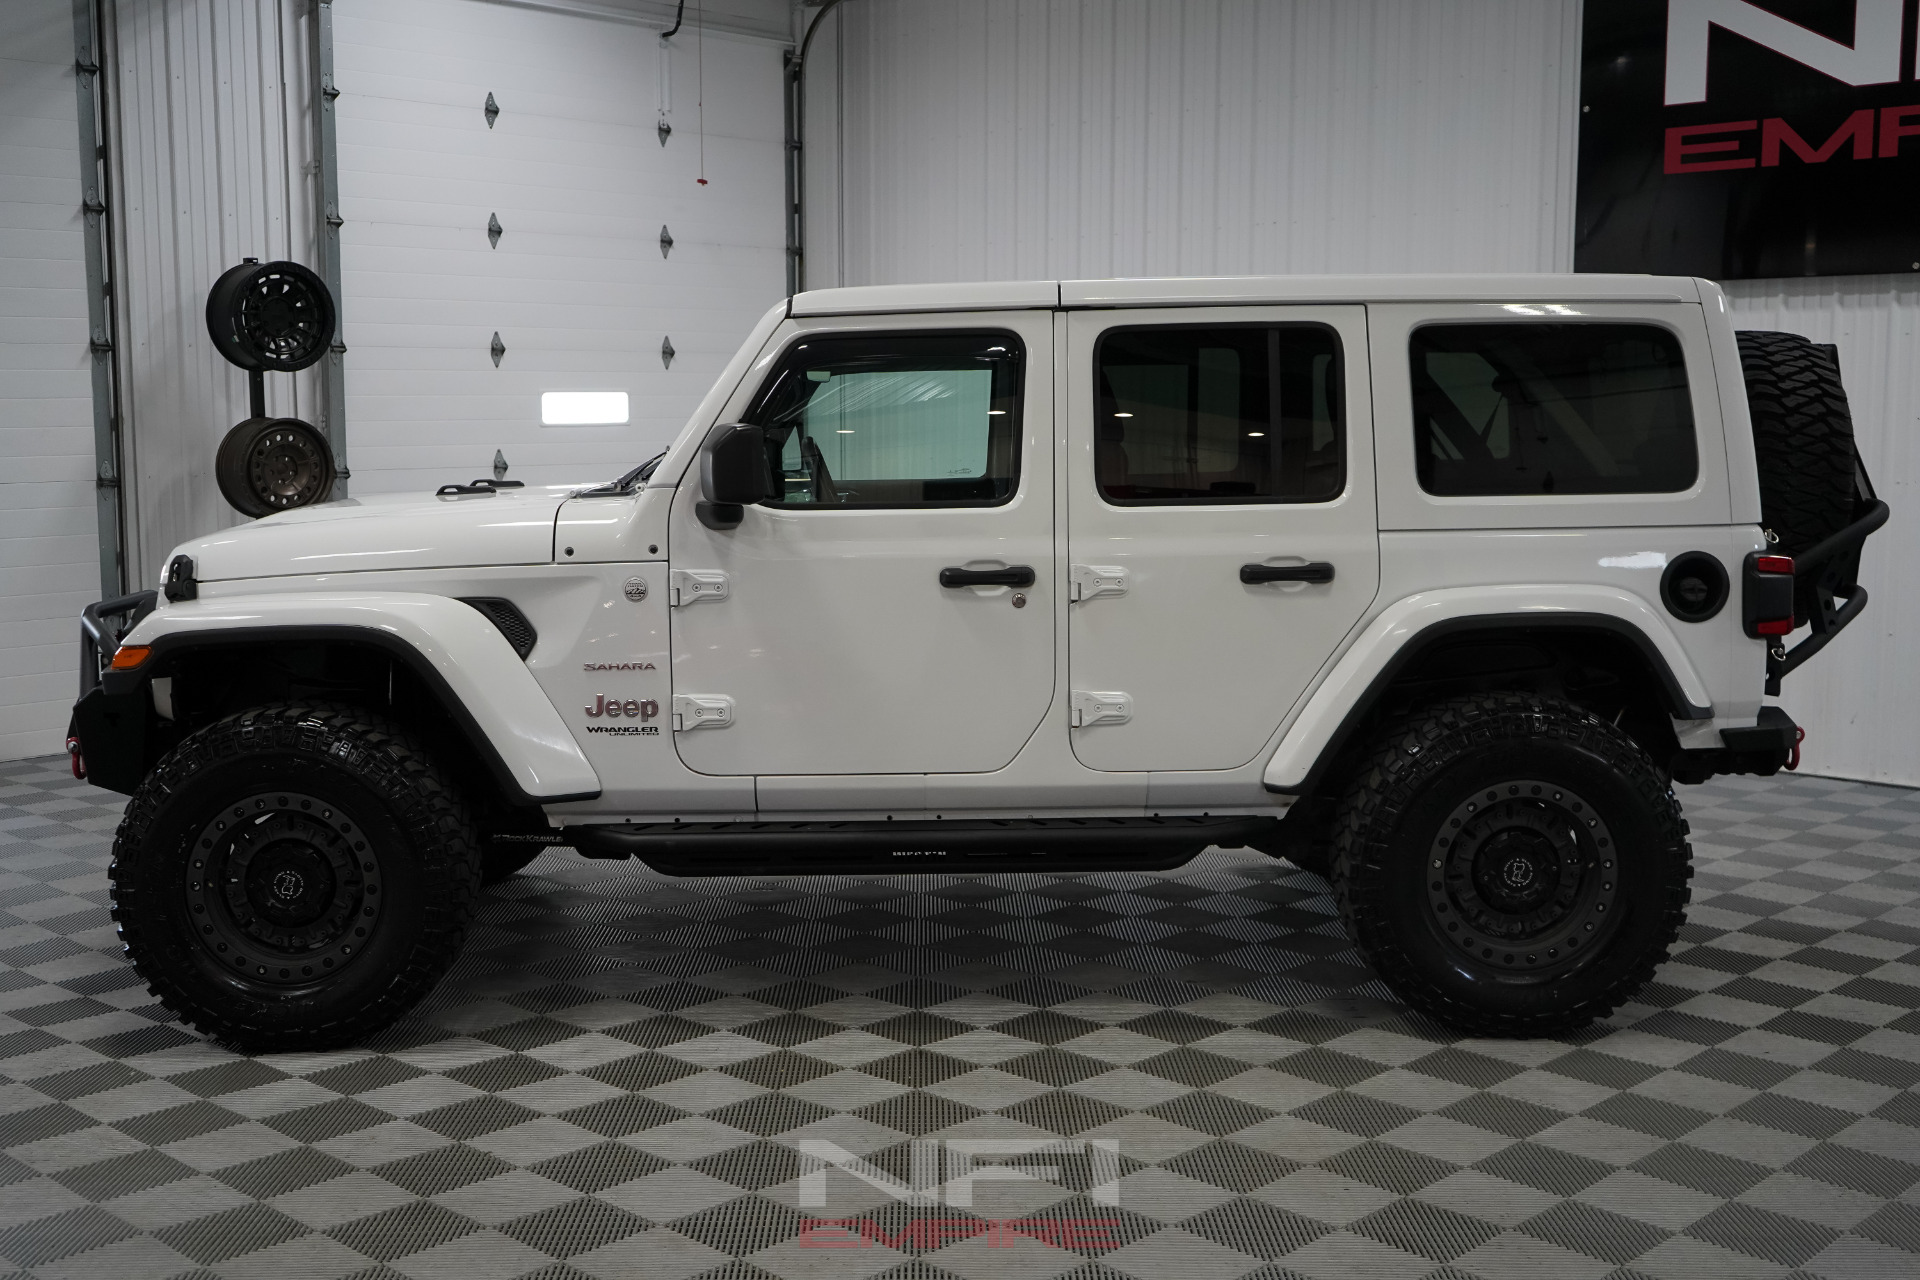 Rugged 2018 Jeep Wrangler JK for sale in Bay City, Michigan